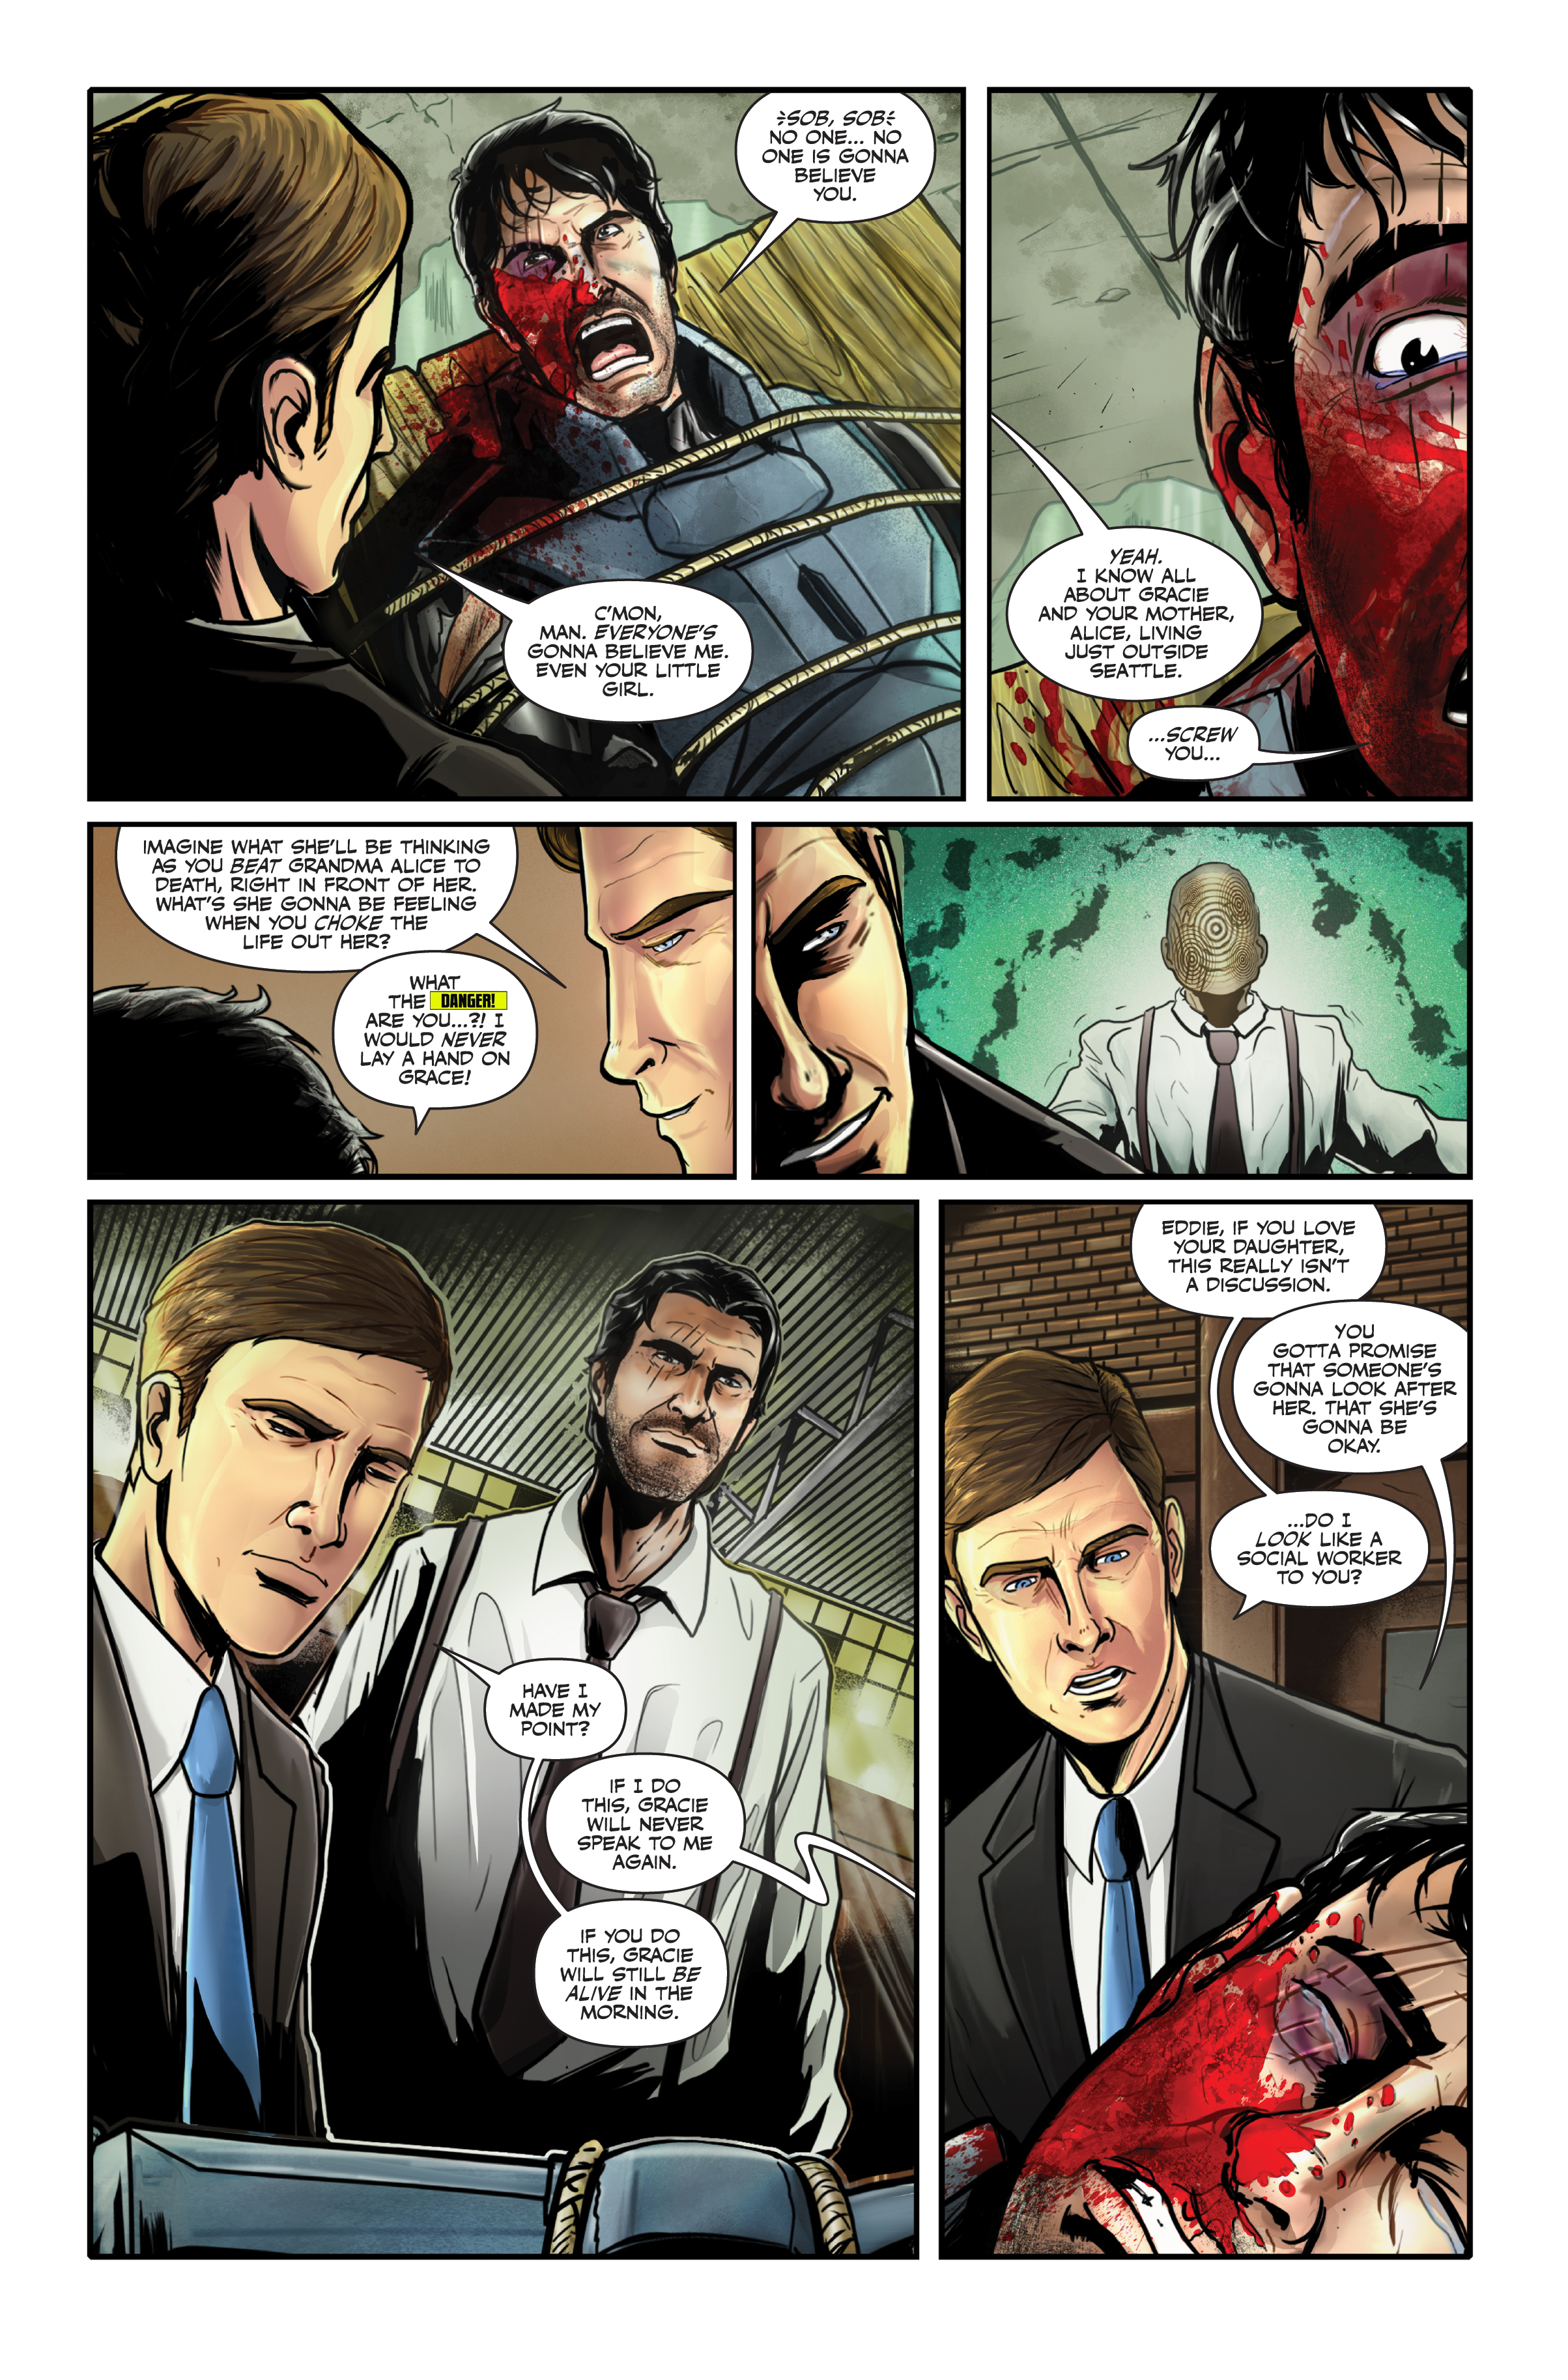 The Consultant #1 Page 3.jpg